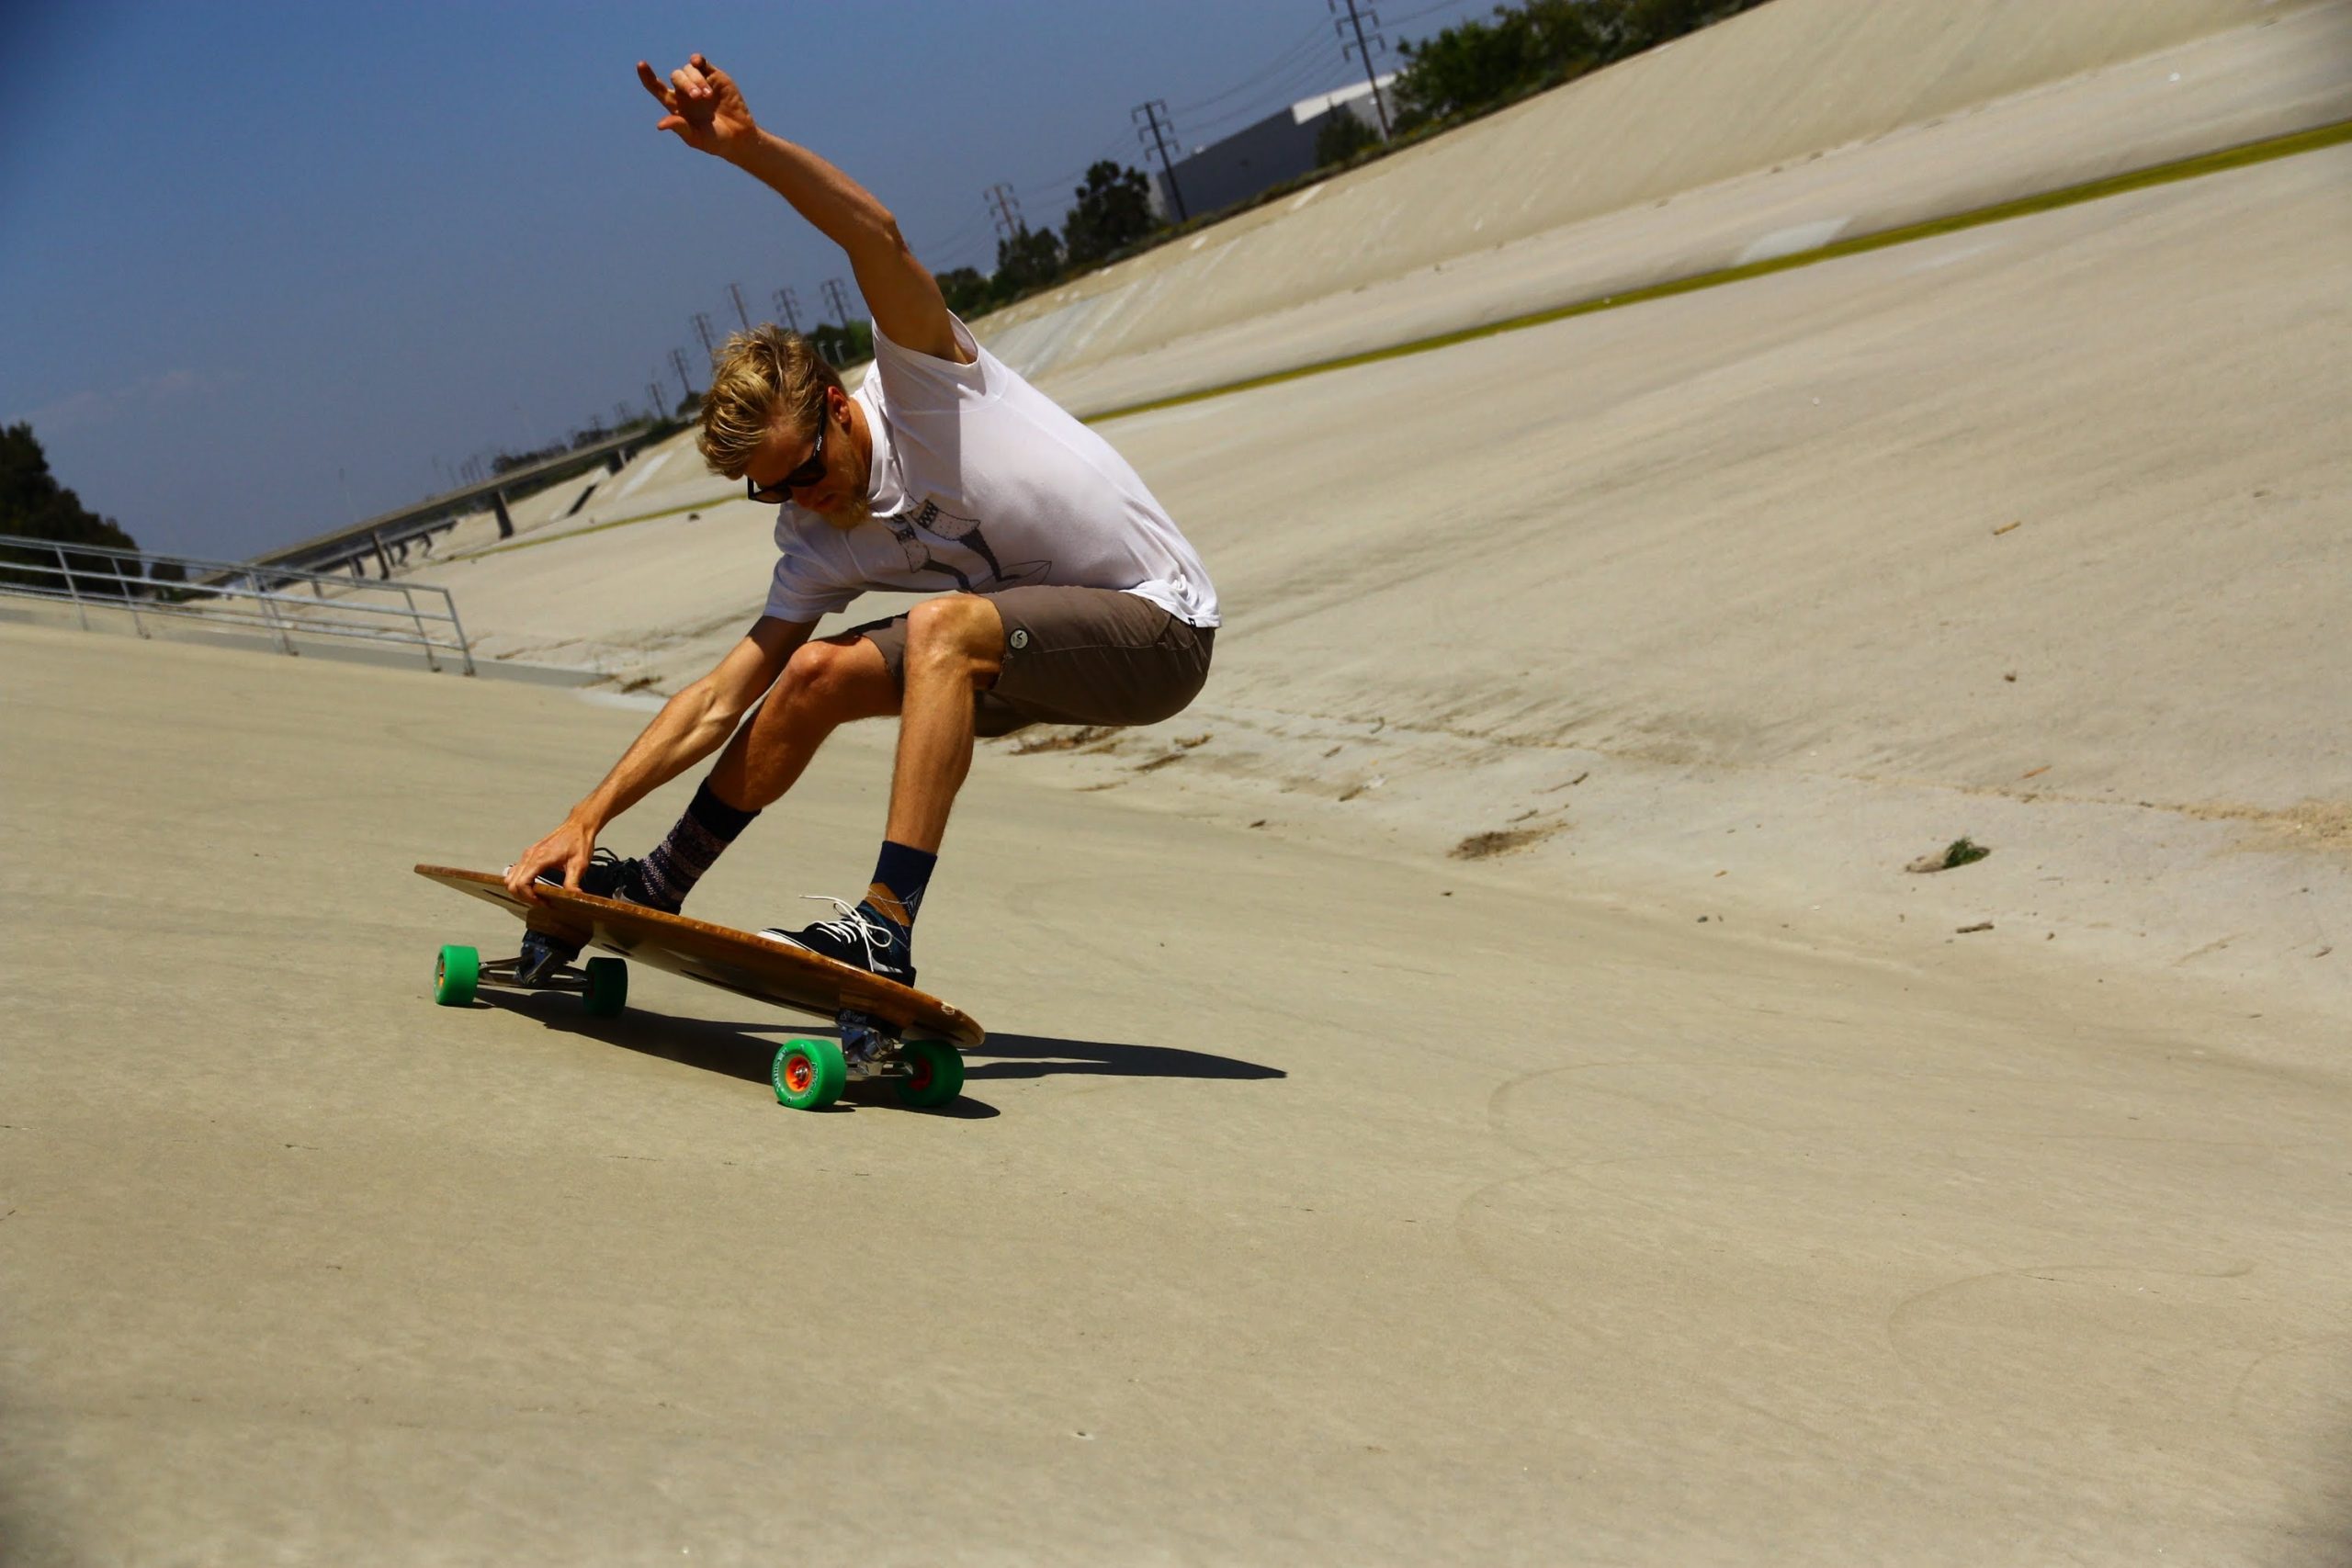 Landsurfing-At-Its-Finest-Surfy-Carvy-Skate-Fish-Video-Review